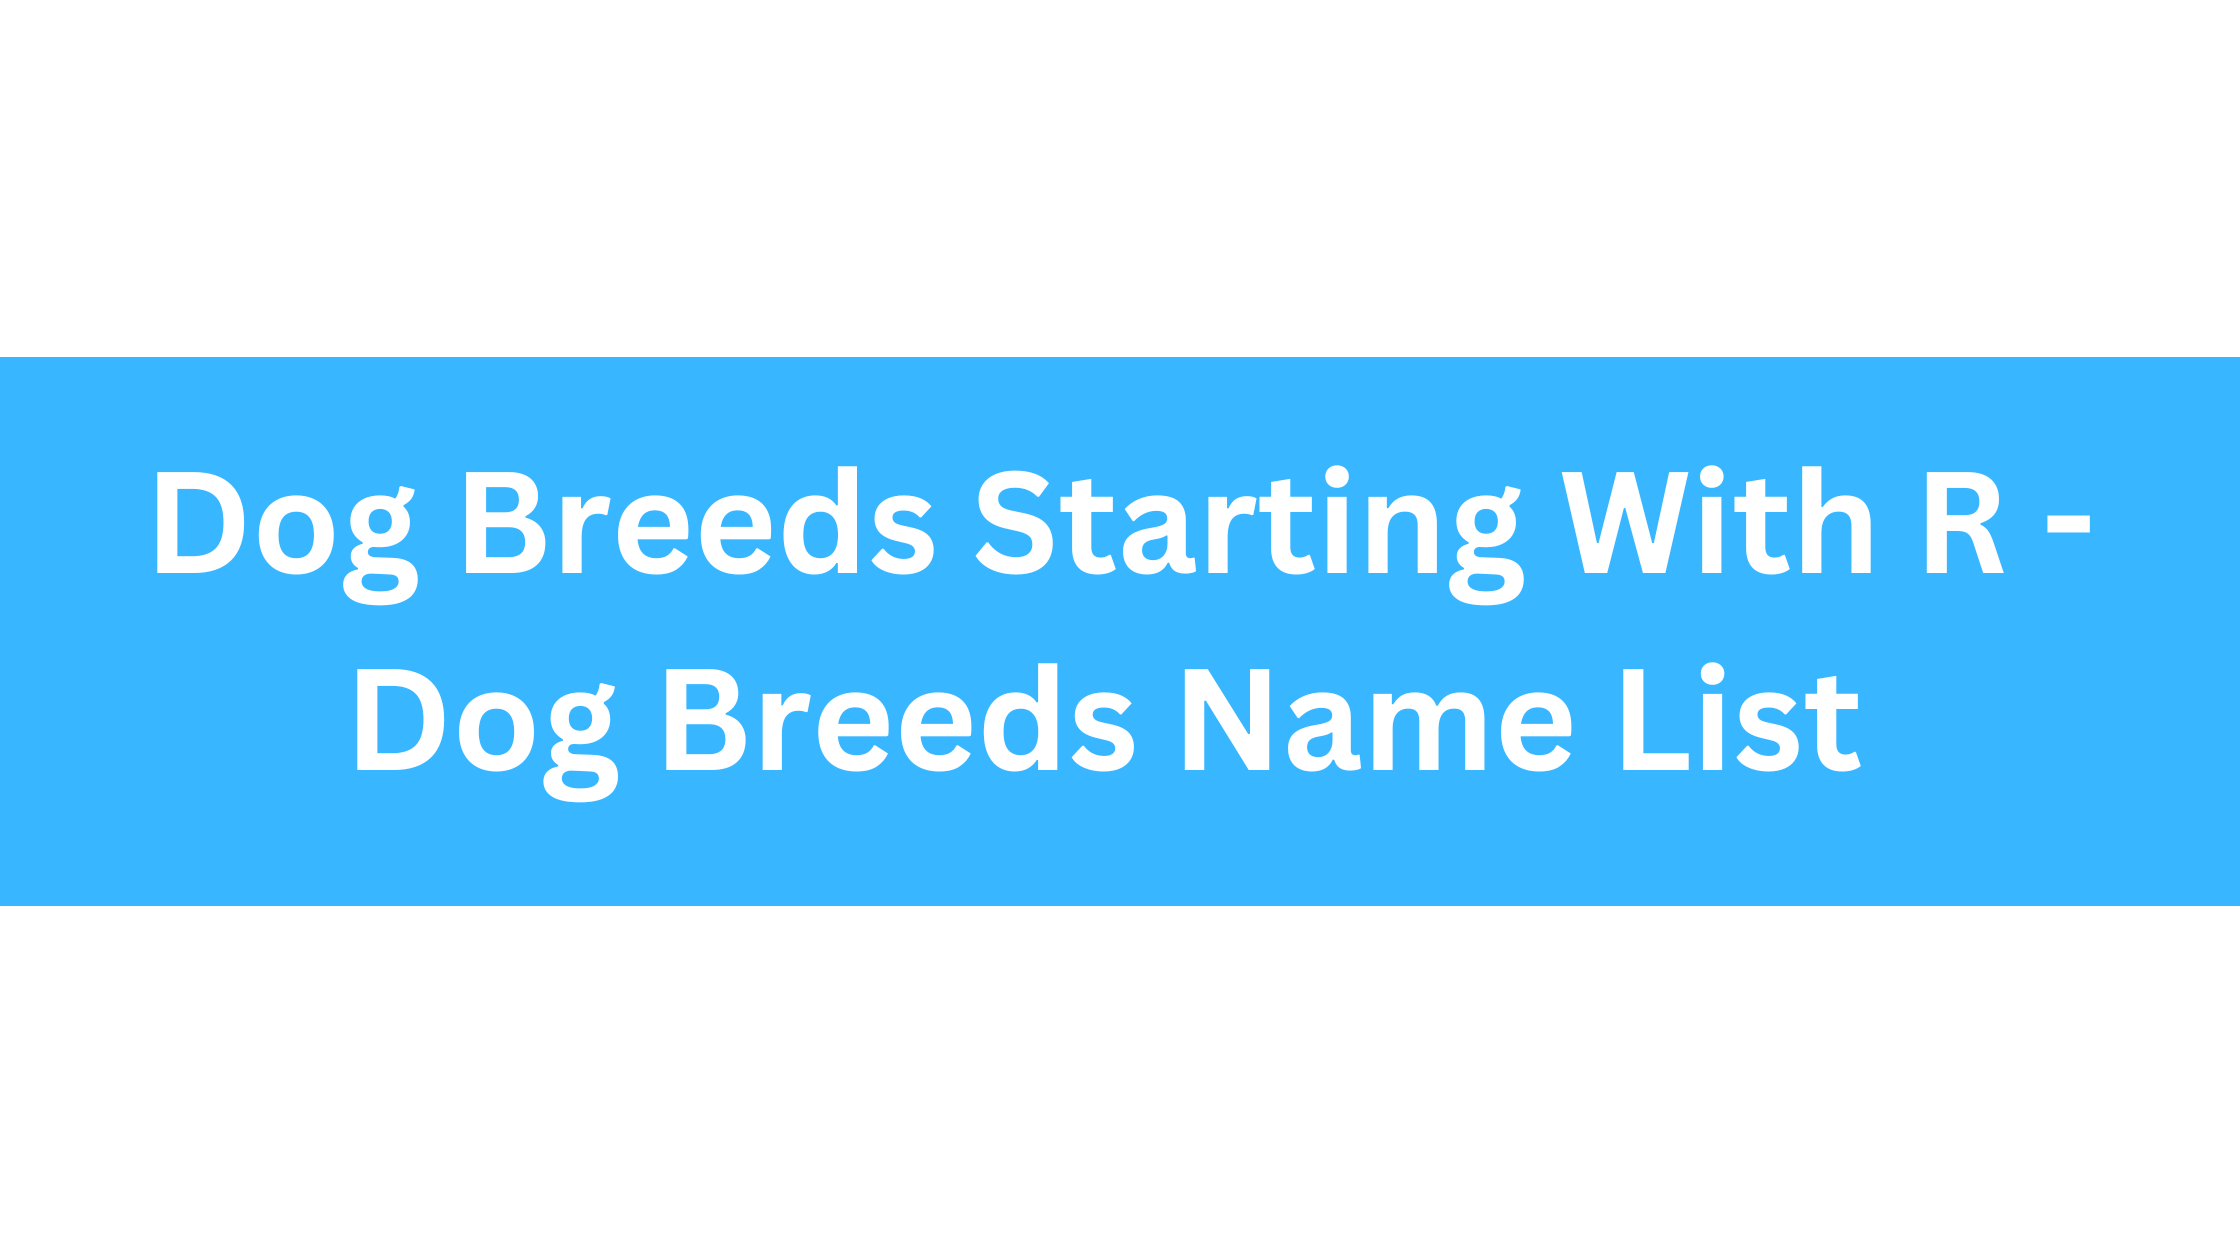 Dog Breeds Starting With R